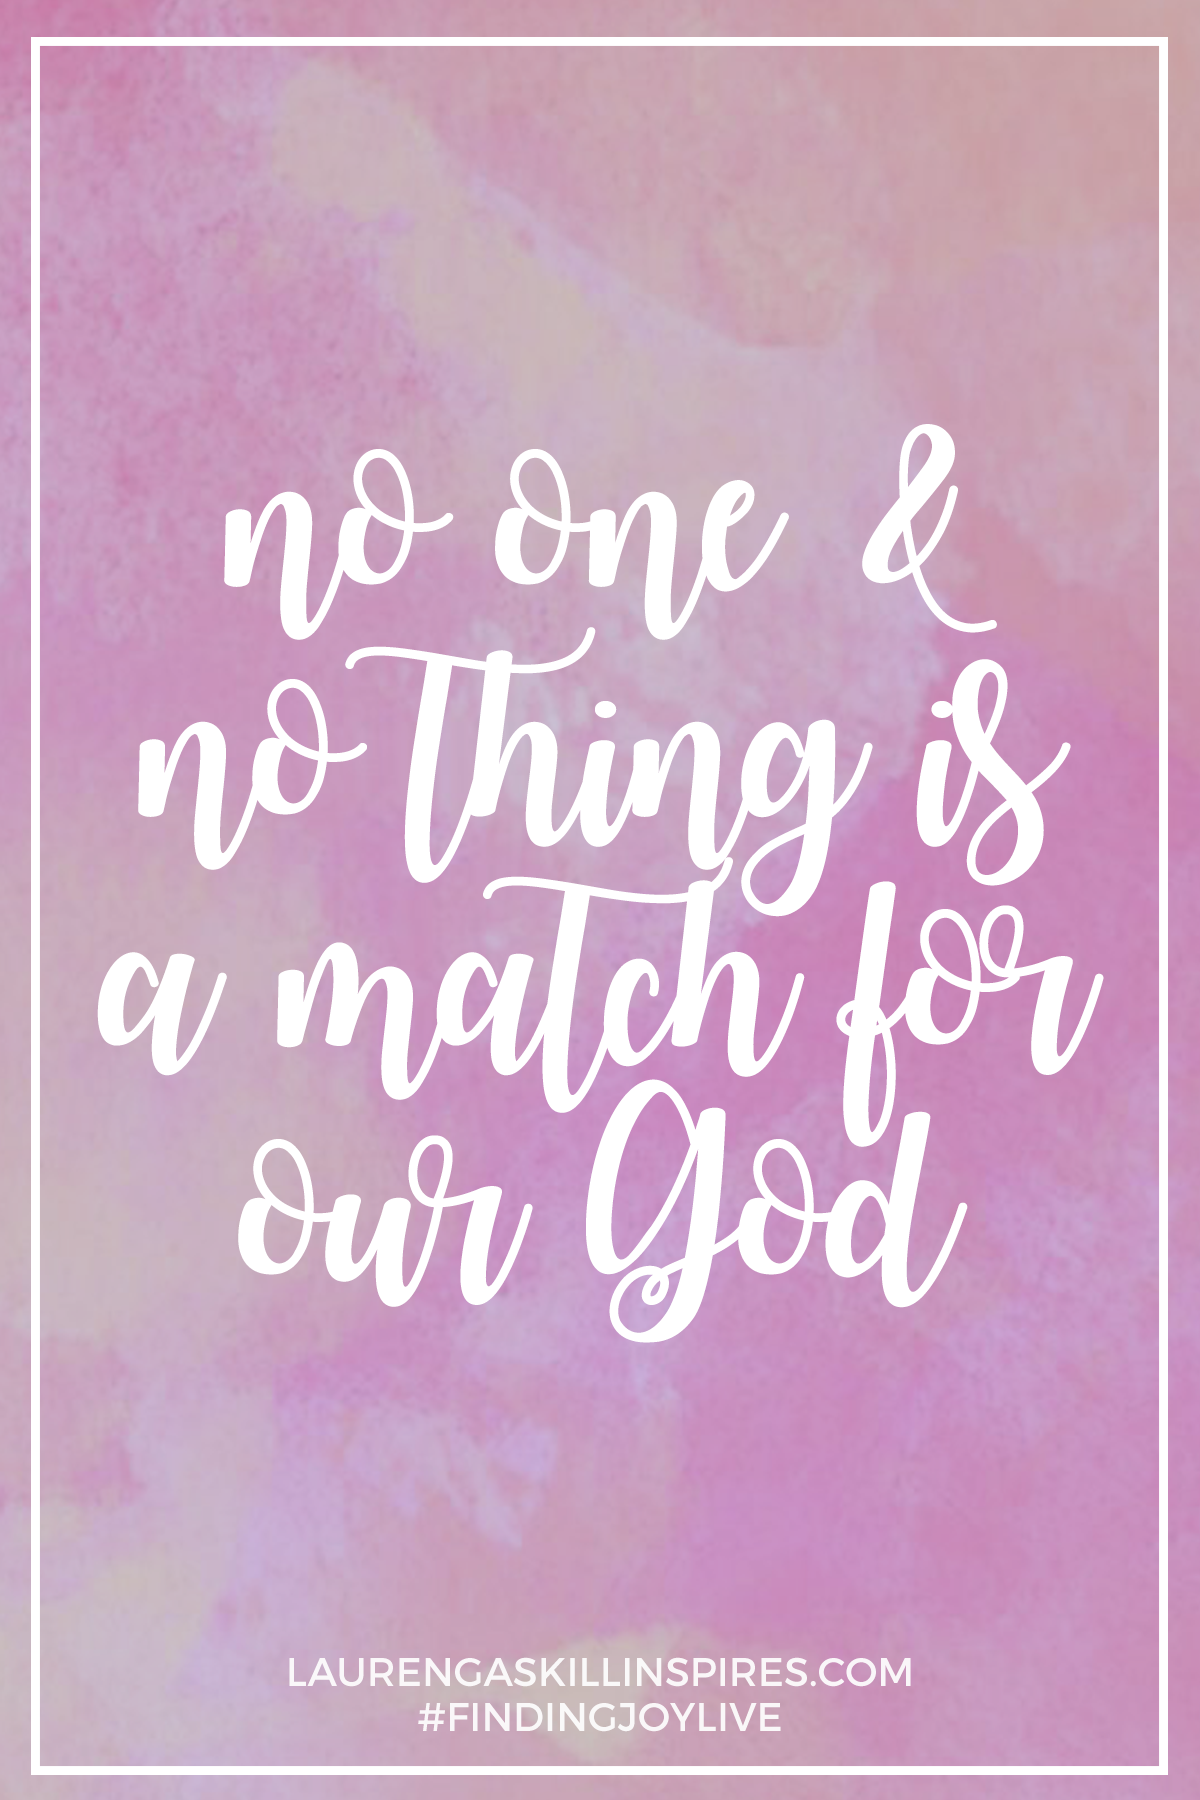 No one and no thing is a match for our God.